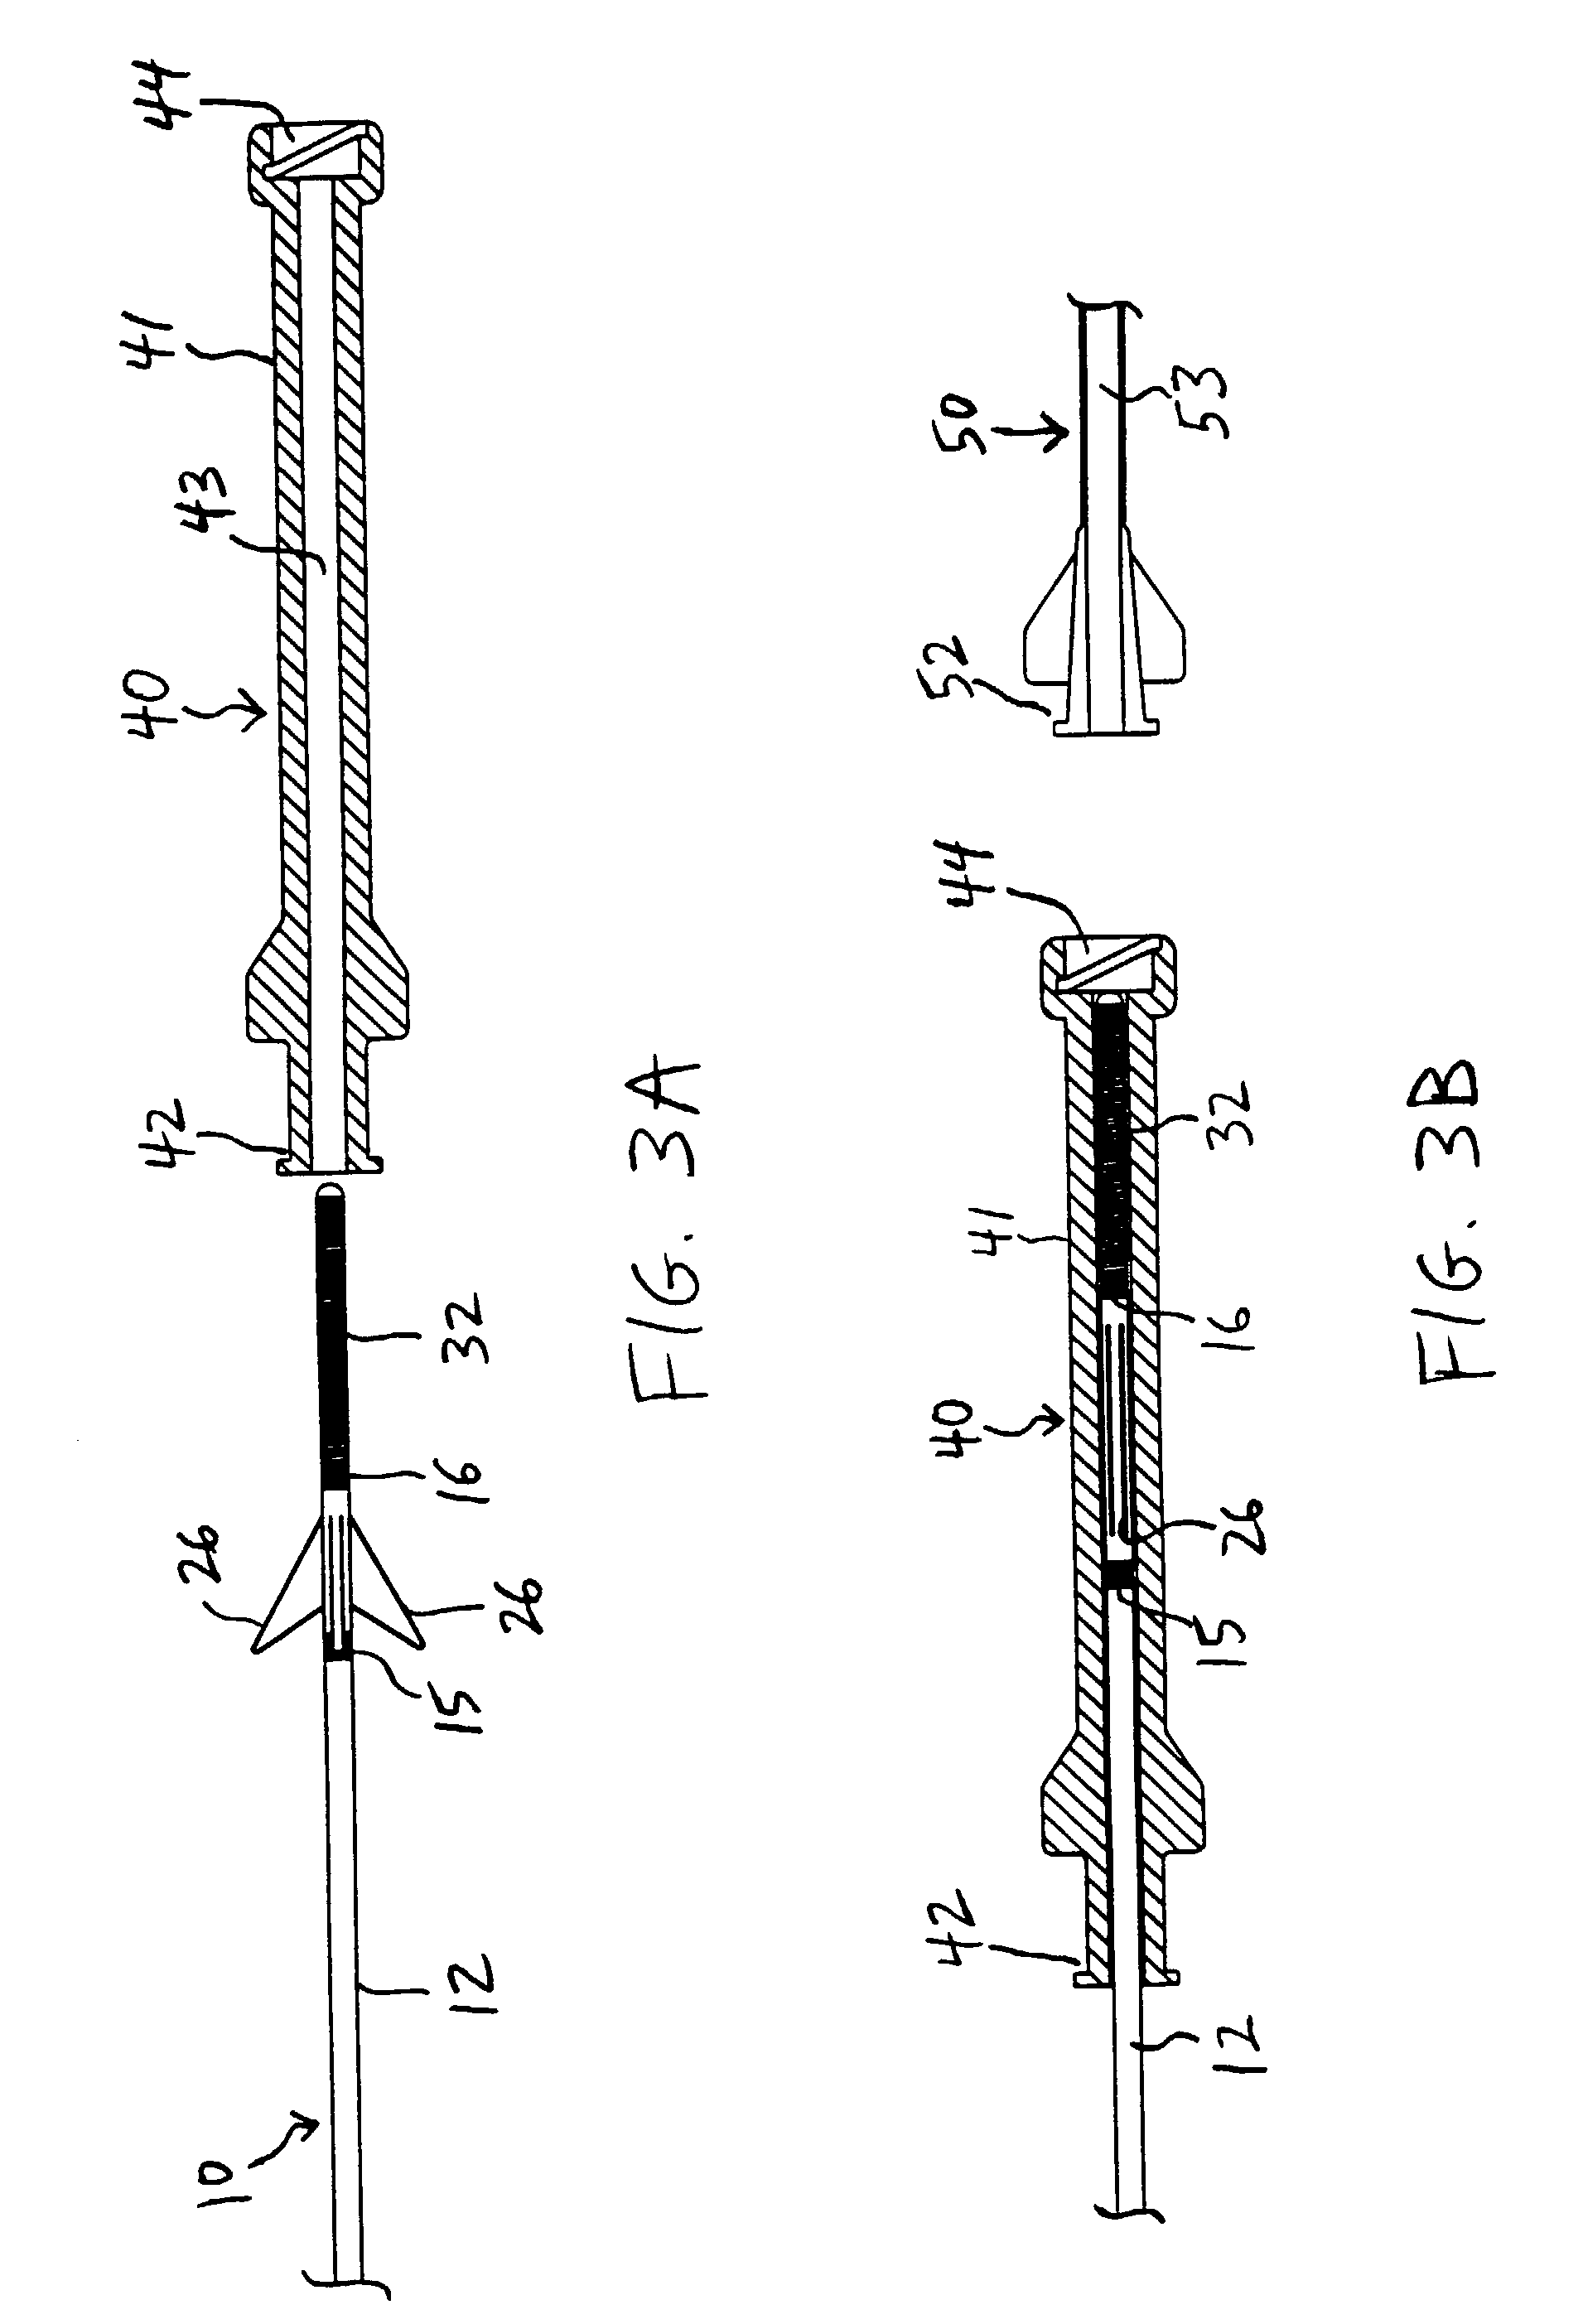 Mechanical thrombectomy device for use in cerebral vessels